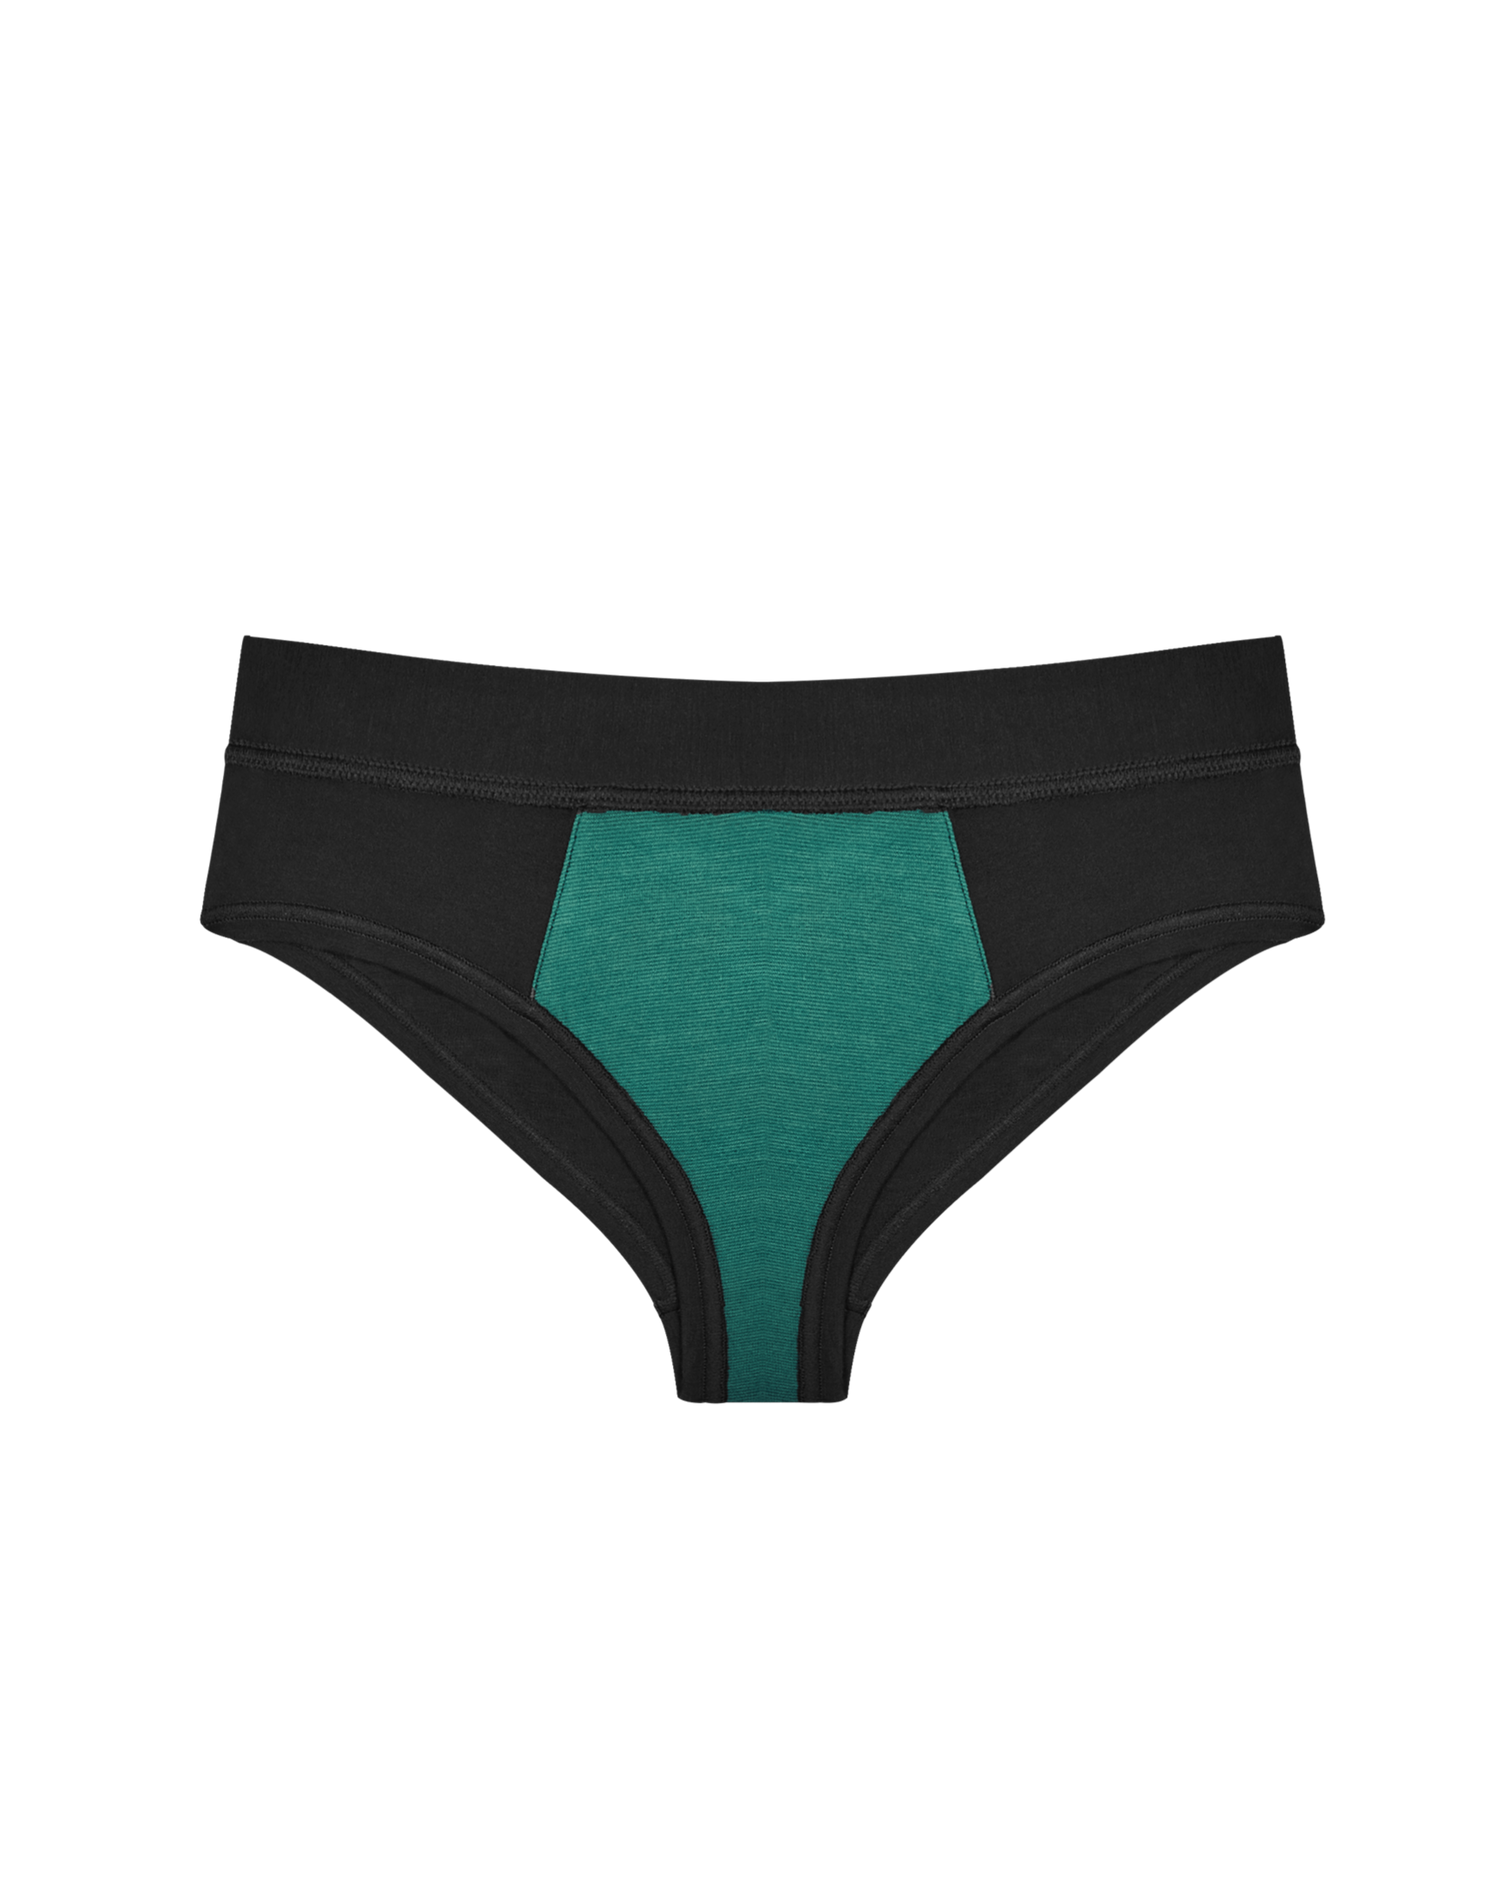 huha underwear feature a seam free gusset infused with soothing